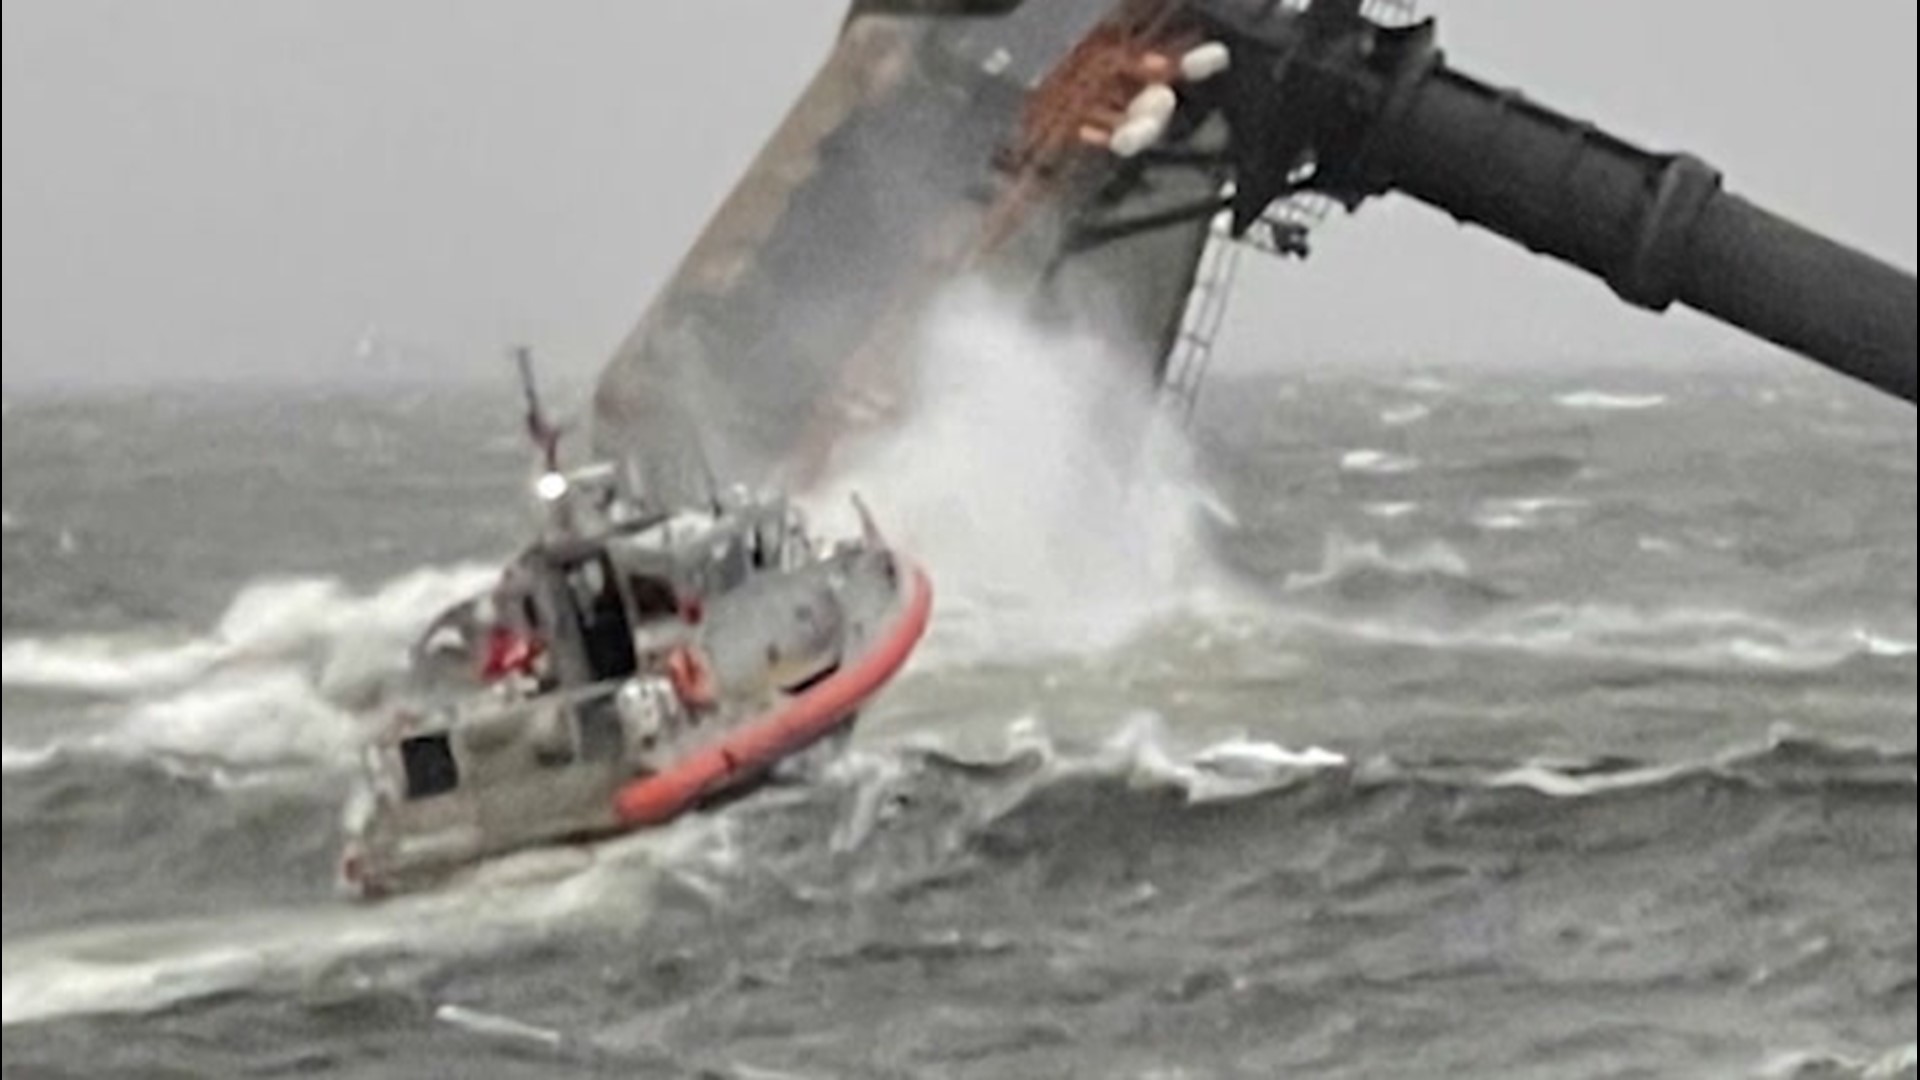 U.S. Coast Guard crews are monitoring the possibly of more storms along the gulf coast as the search for crew members missing from a capsized vessel off the coast of Louisiana.